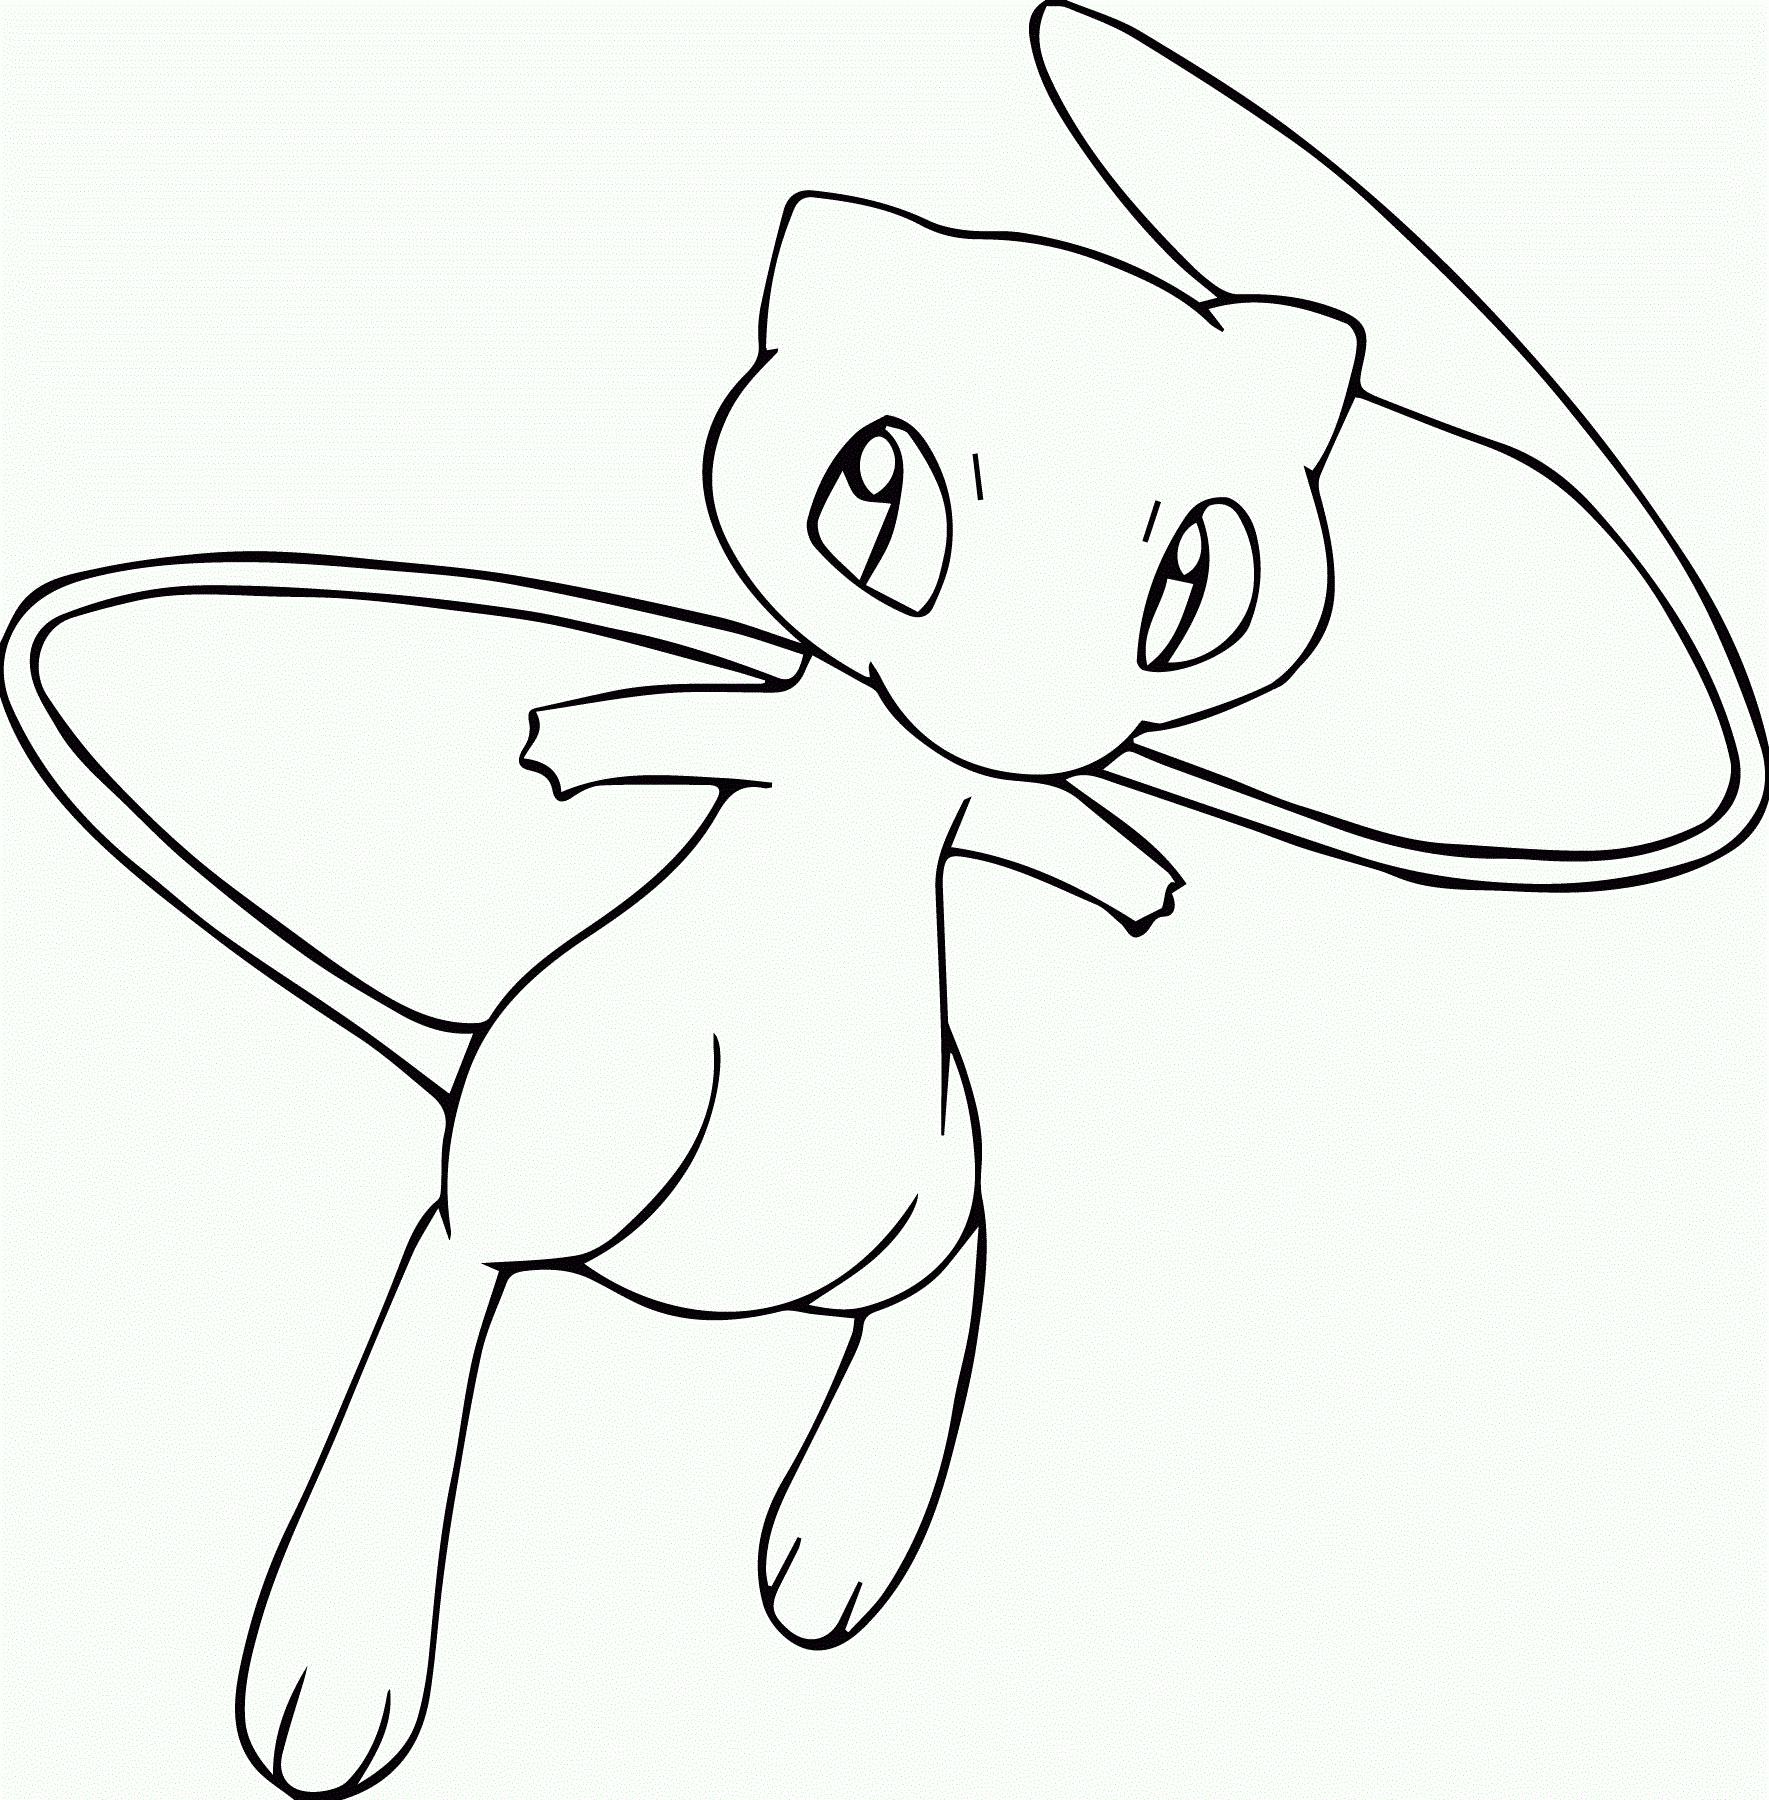 Free Mew Coloring Pages | Educative Printable | Pokemon Coloring Pages à Coloriage Pokemon Mew Et Mewtwo